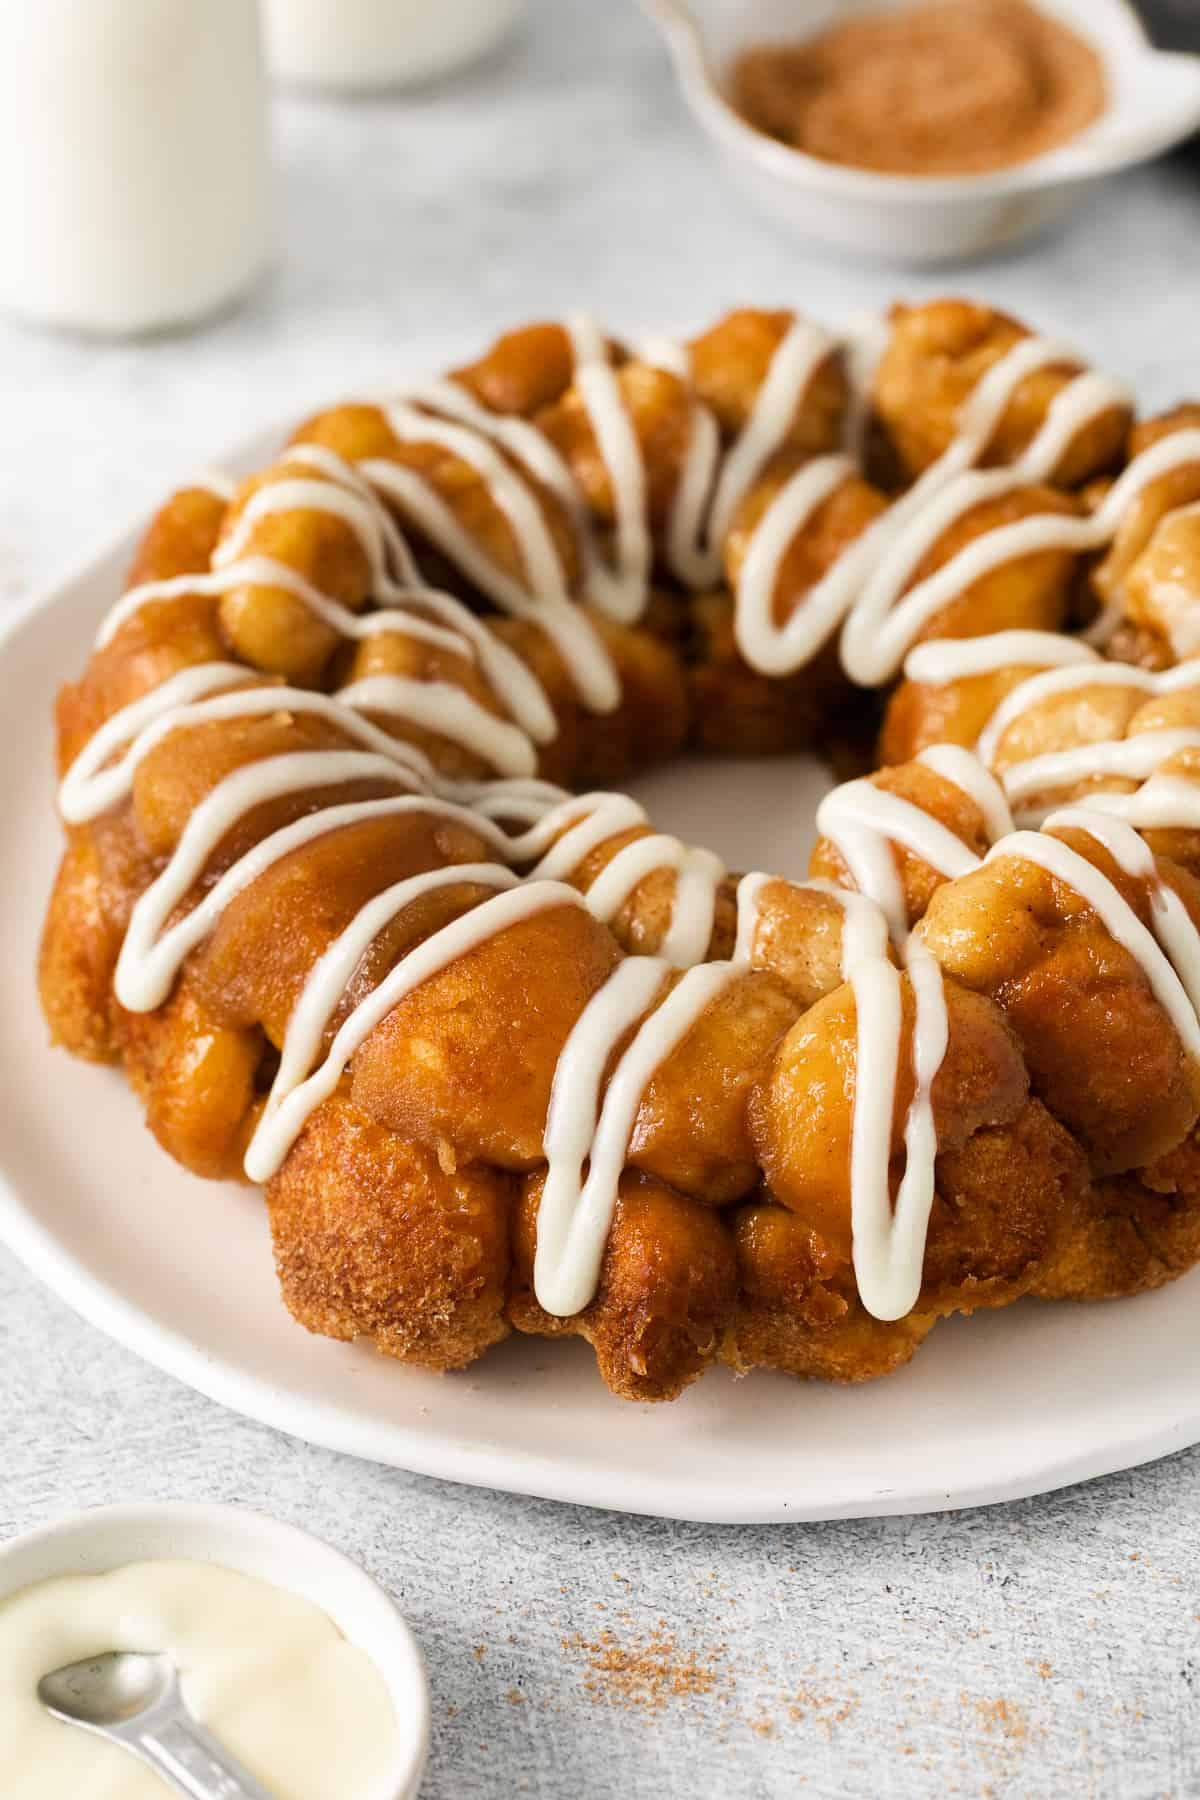 Monkey bread with cream cheese frosting on a plate.